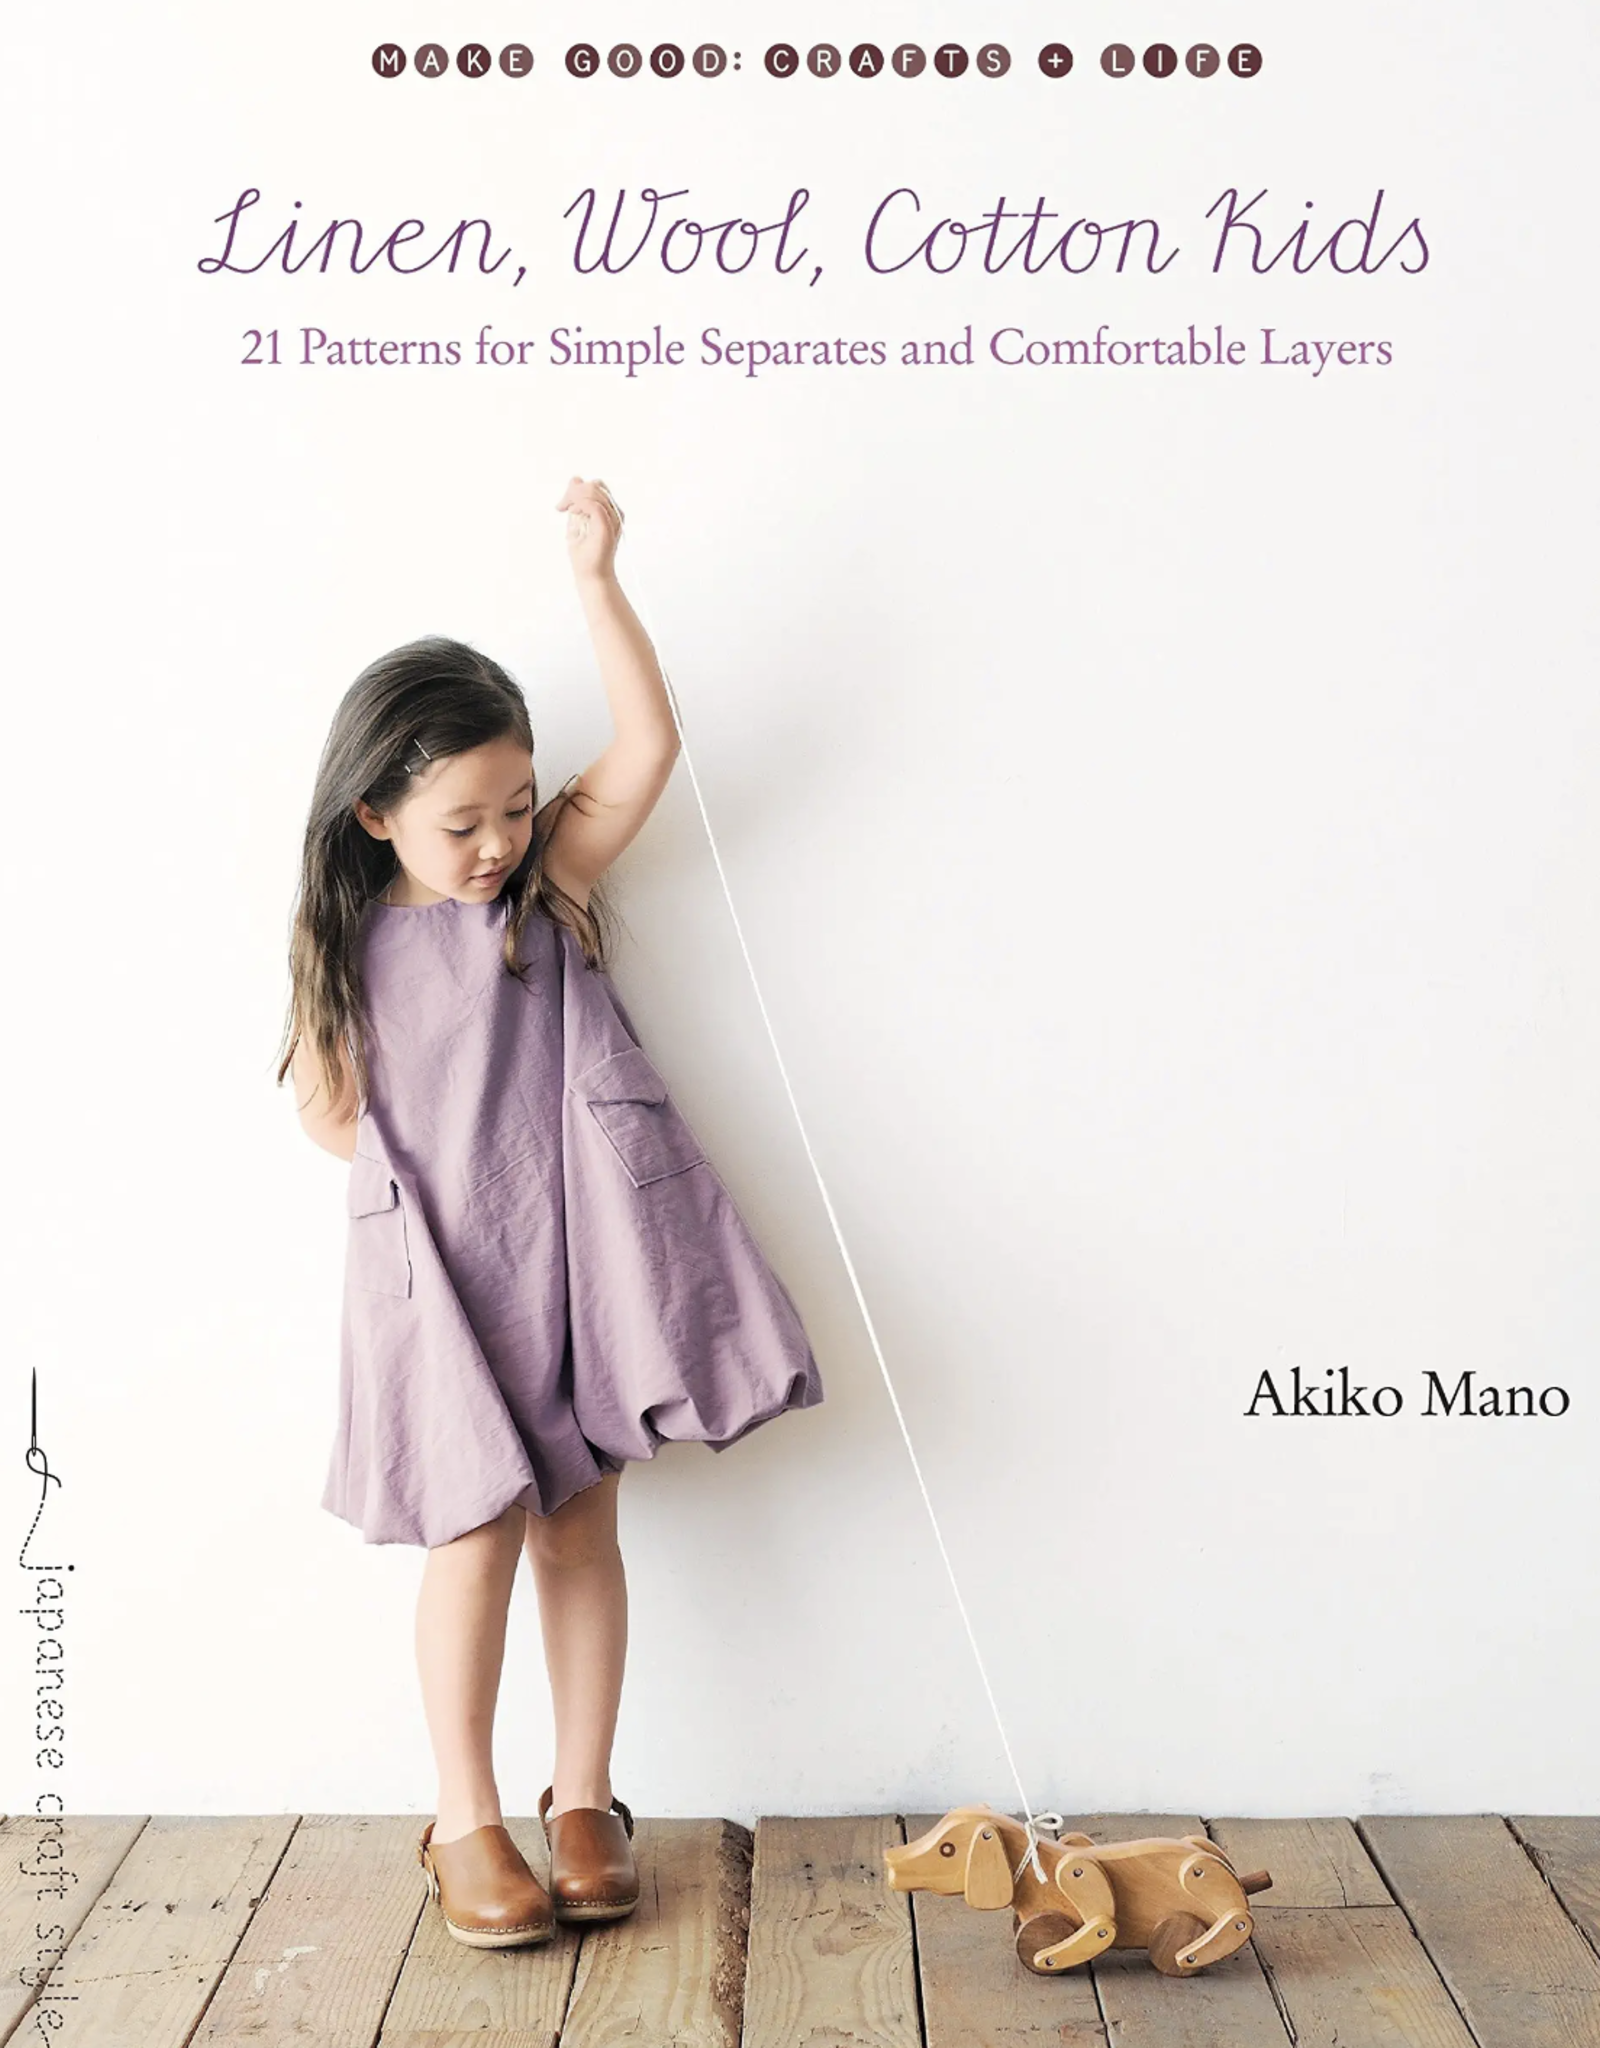 Linen, Wool, Cotton, Kids: 21 Patterns for Simple Separates and Comfortable Layers